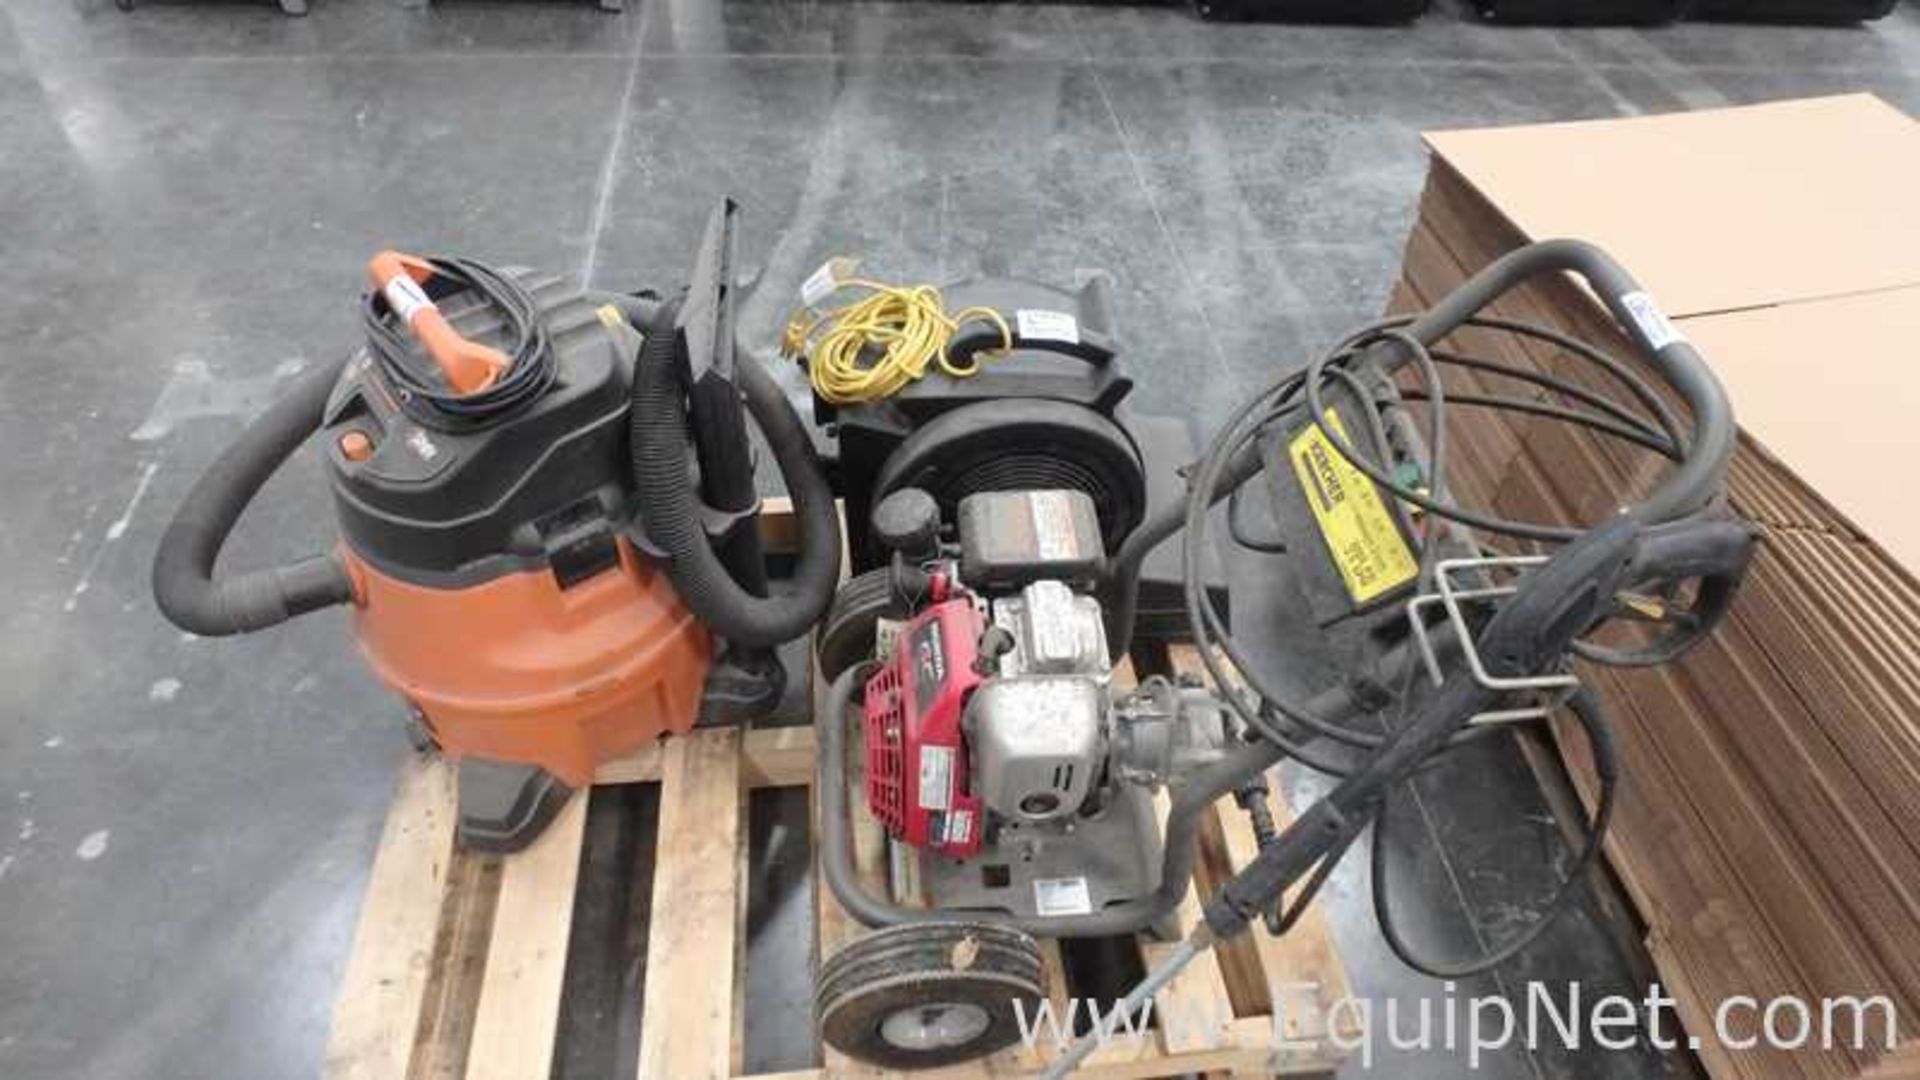 Lot of 1 Pallet With karcher G3000 OH Gas Pressure Washser, Ridgid Wet/Dry Vacuum and Hydrodry Dryer - Image 12 of 12